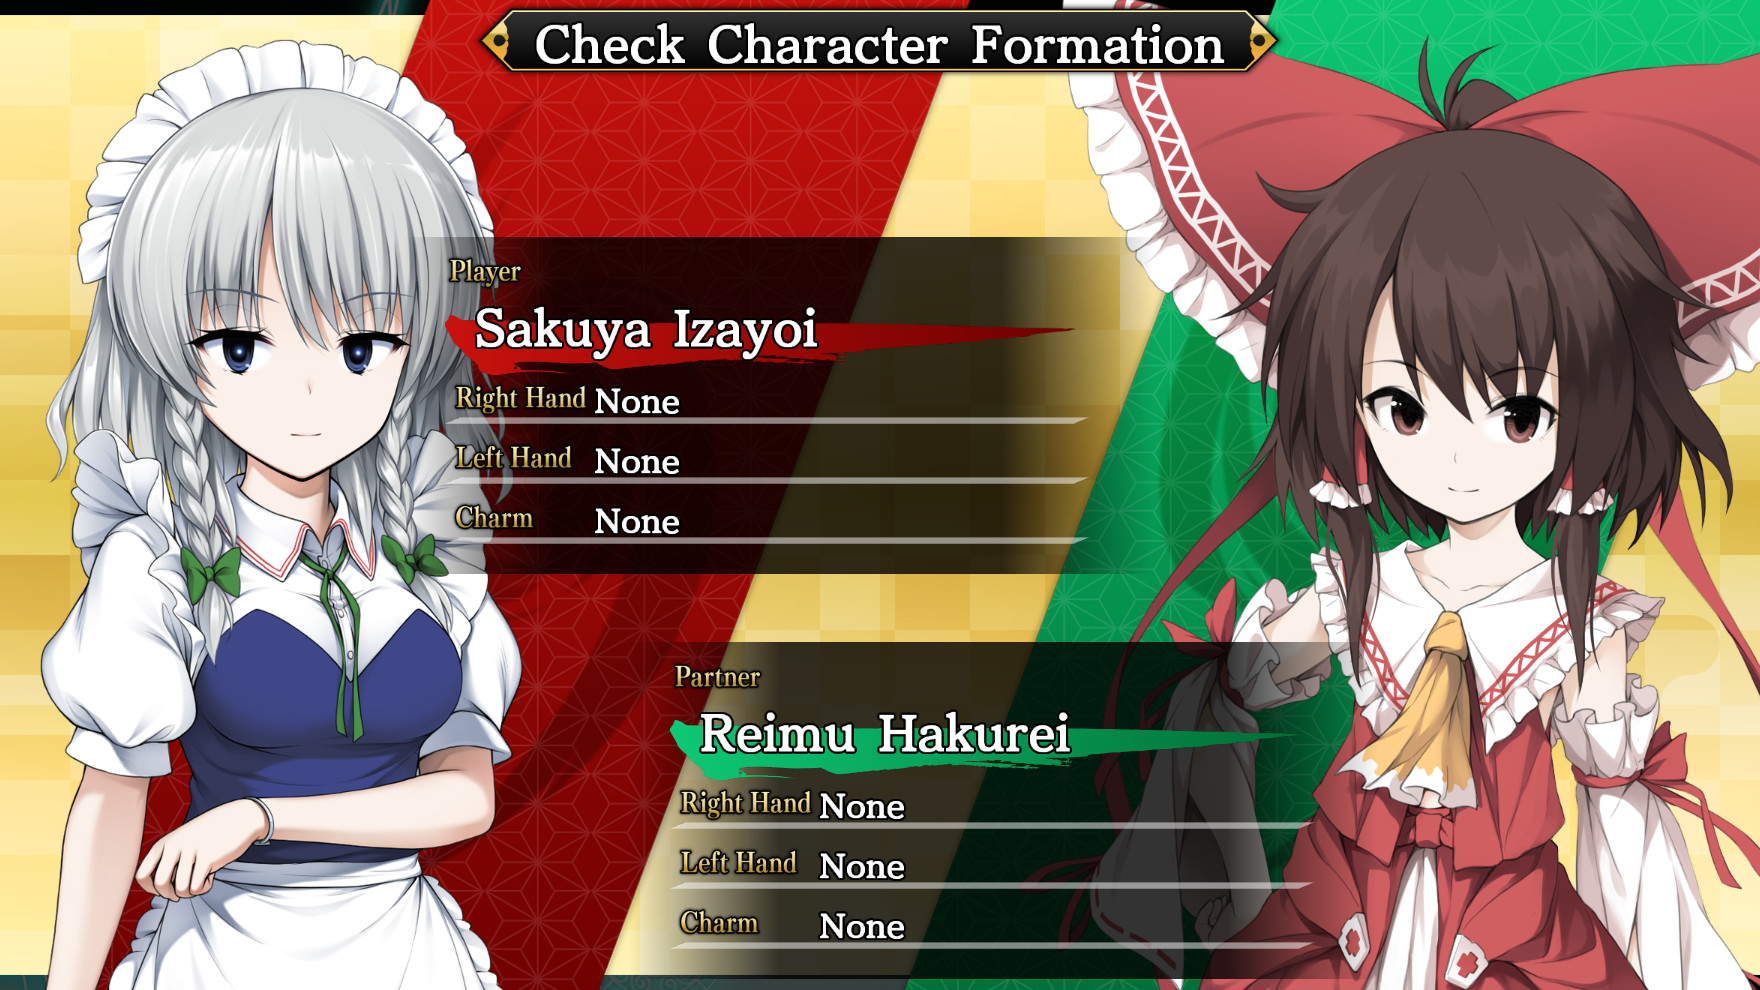 There are far more images available for Touhou Genso Wanderer Reloaded: Sak...